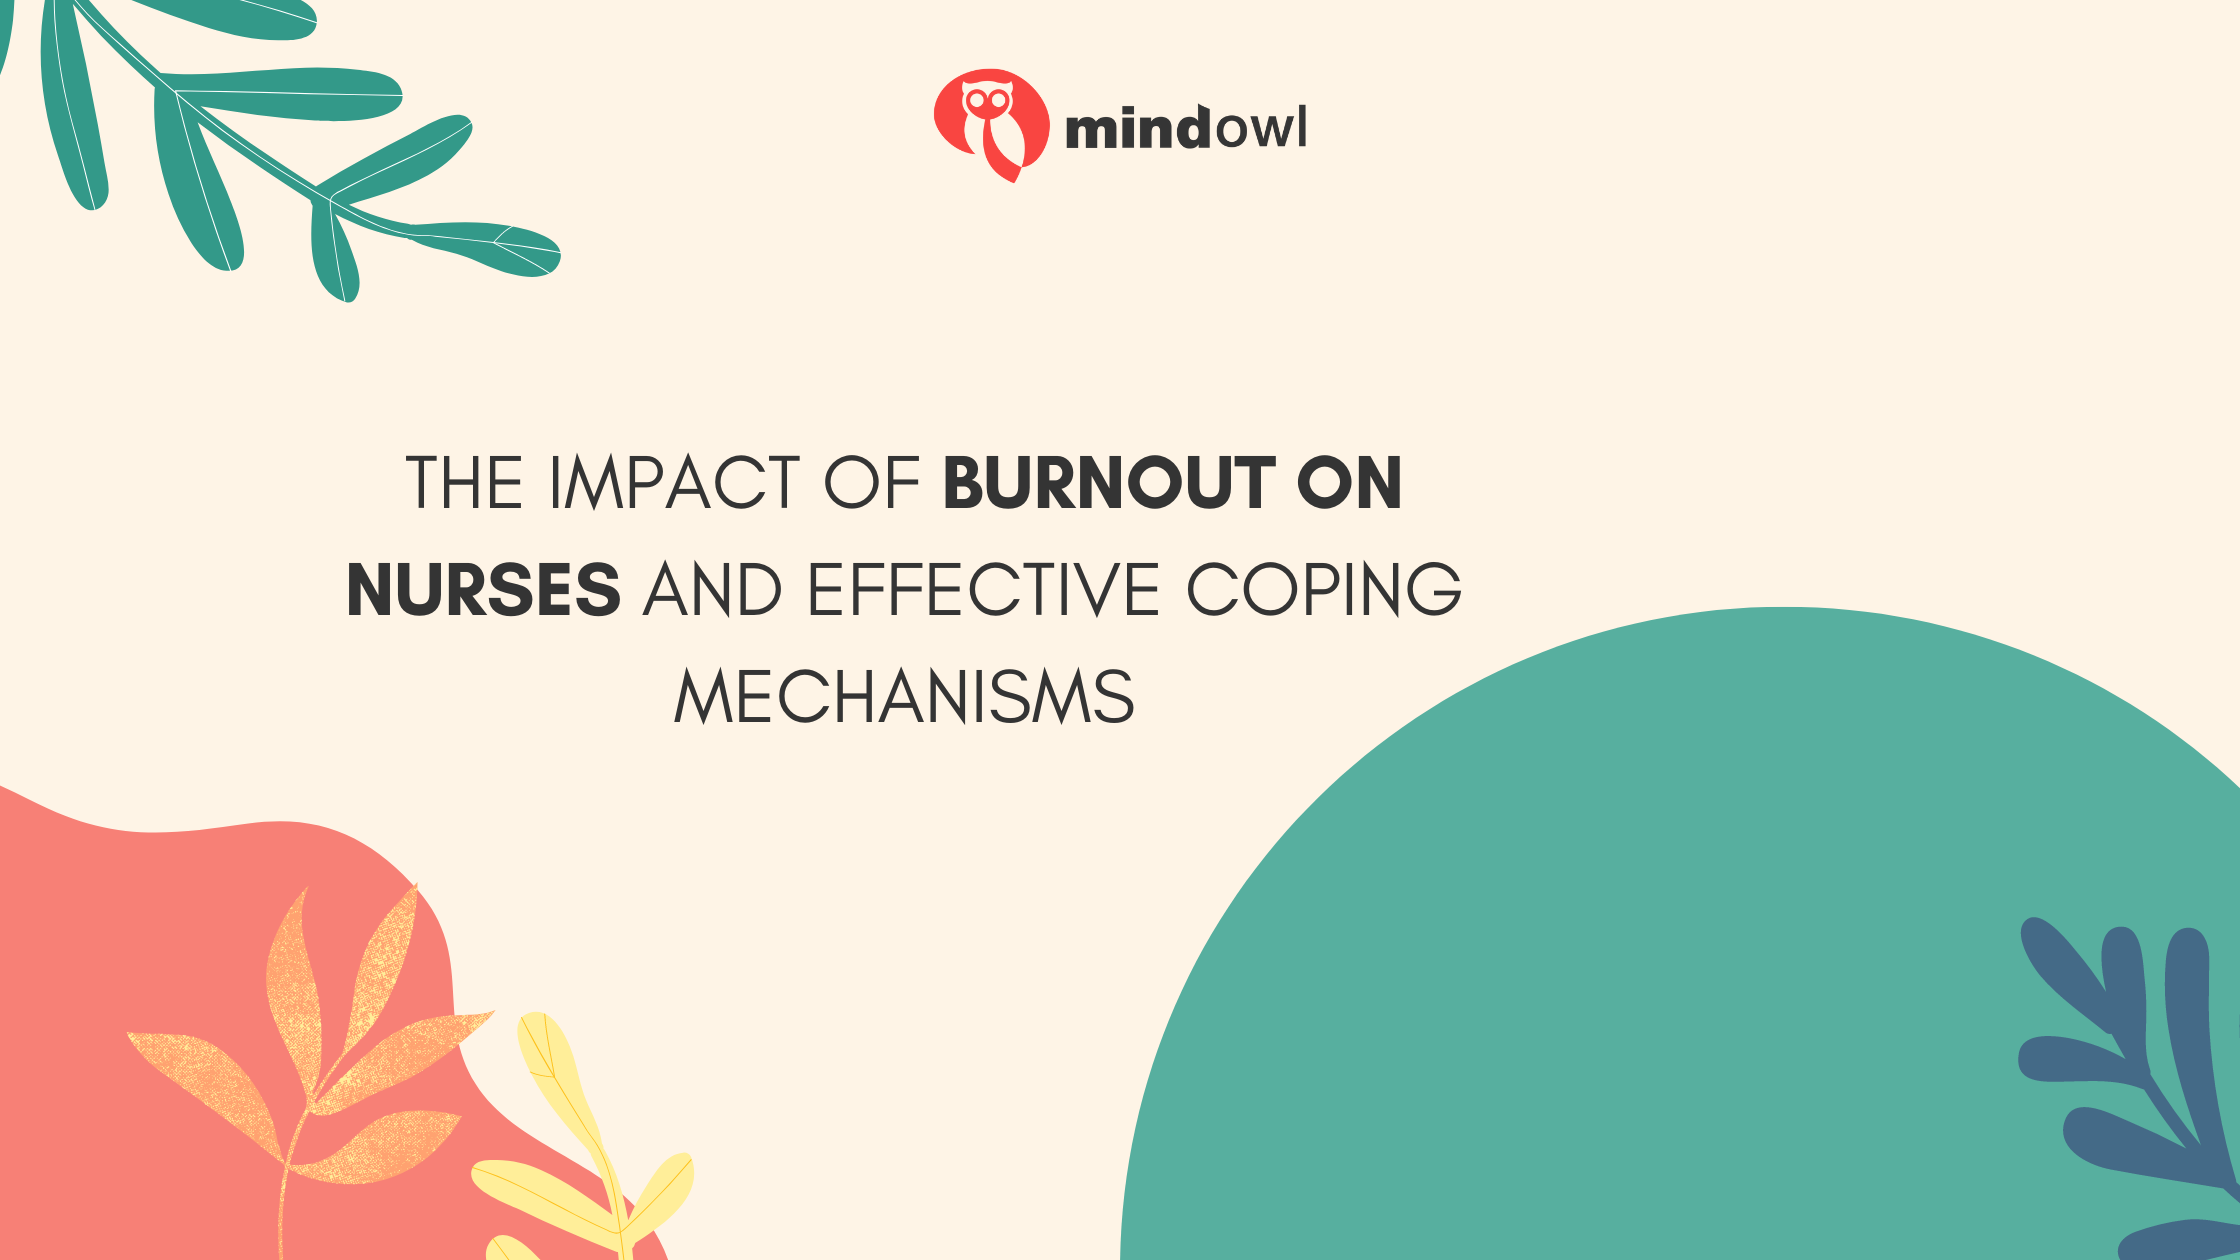 The Impact of Burnout on Nurses and Effective Coping Mechanisms